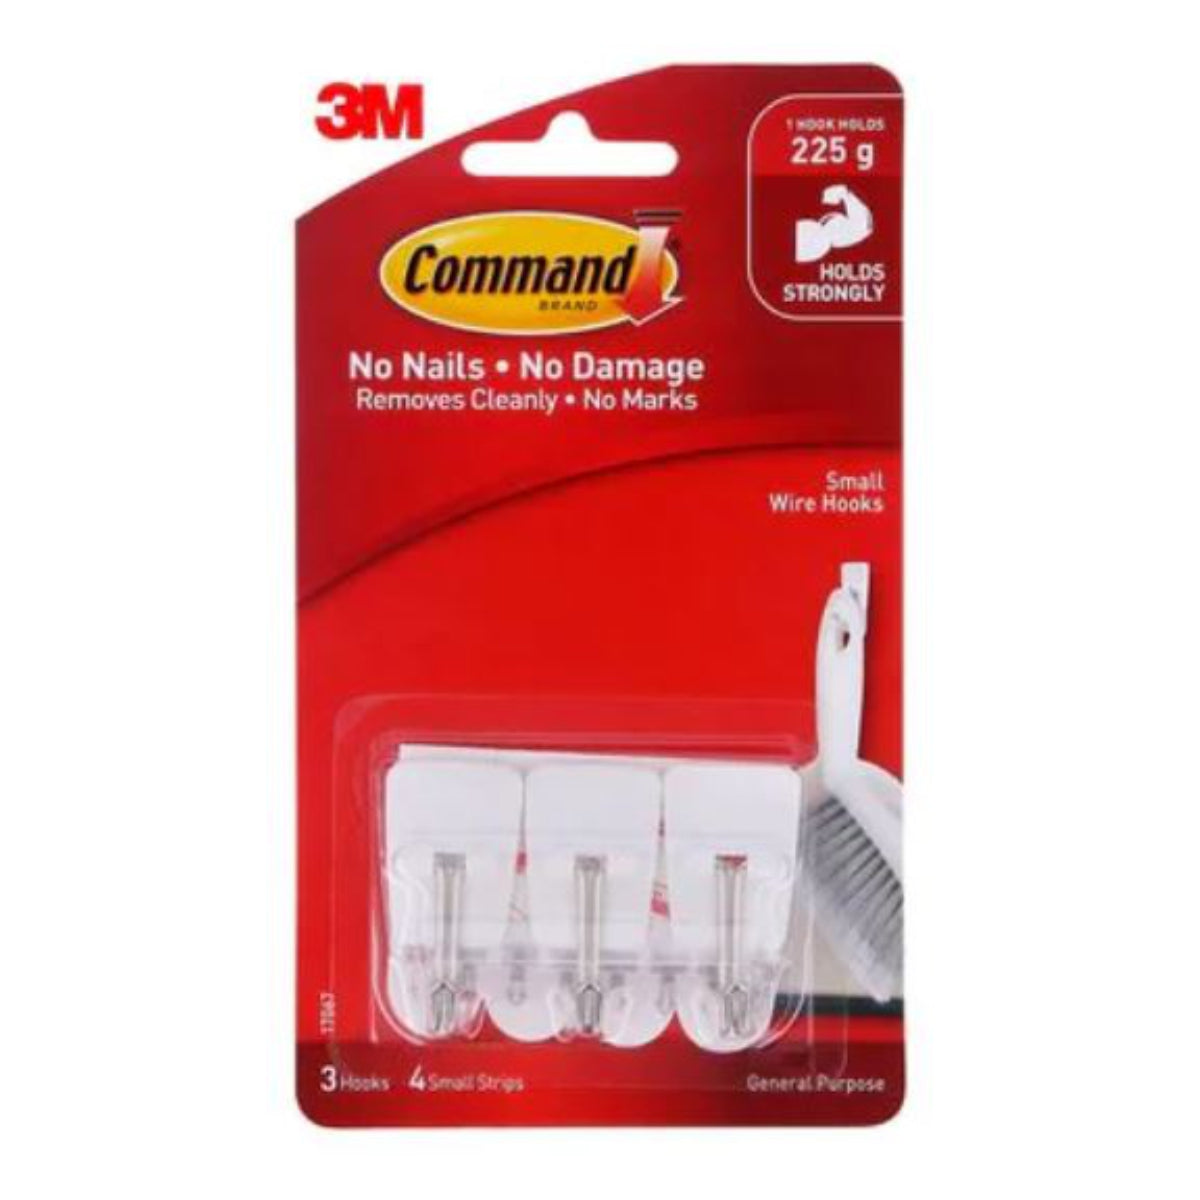 COMMAND Hook 17067 Pack of 3 Bx6